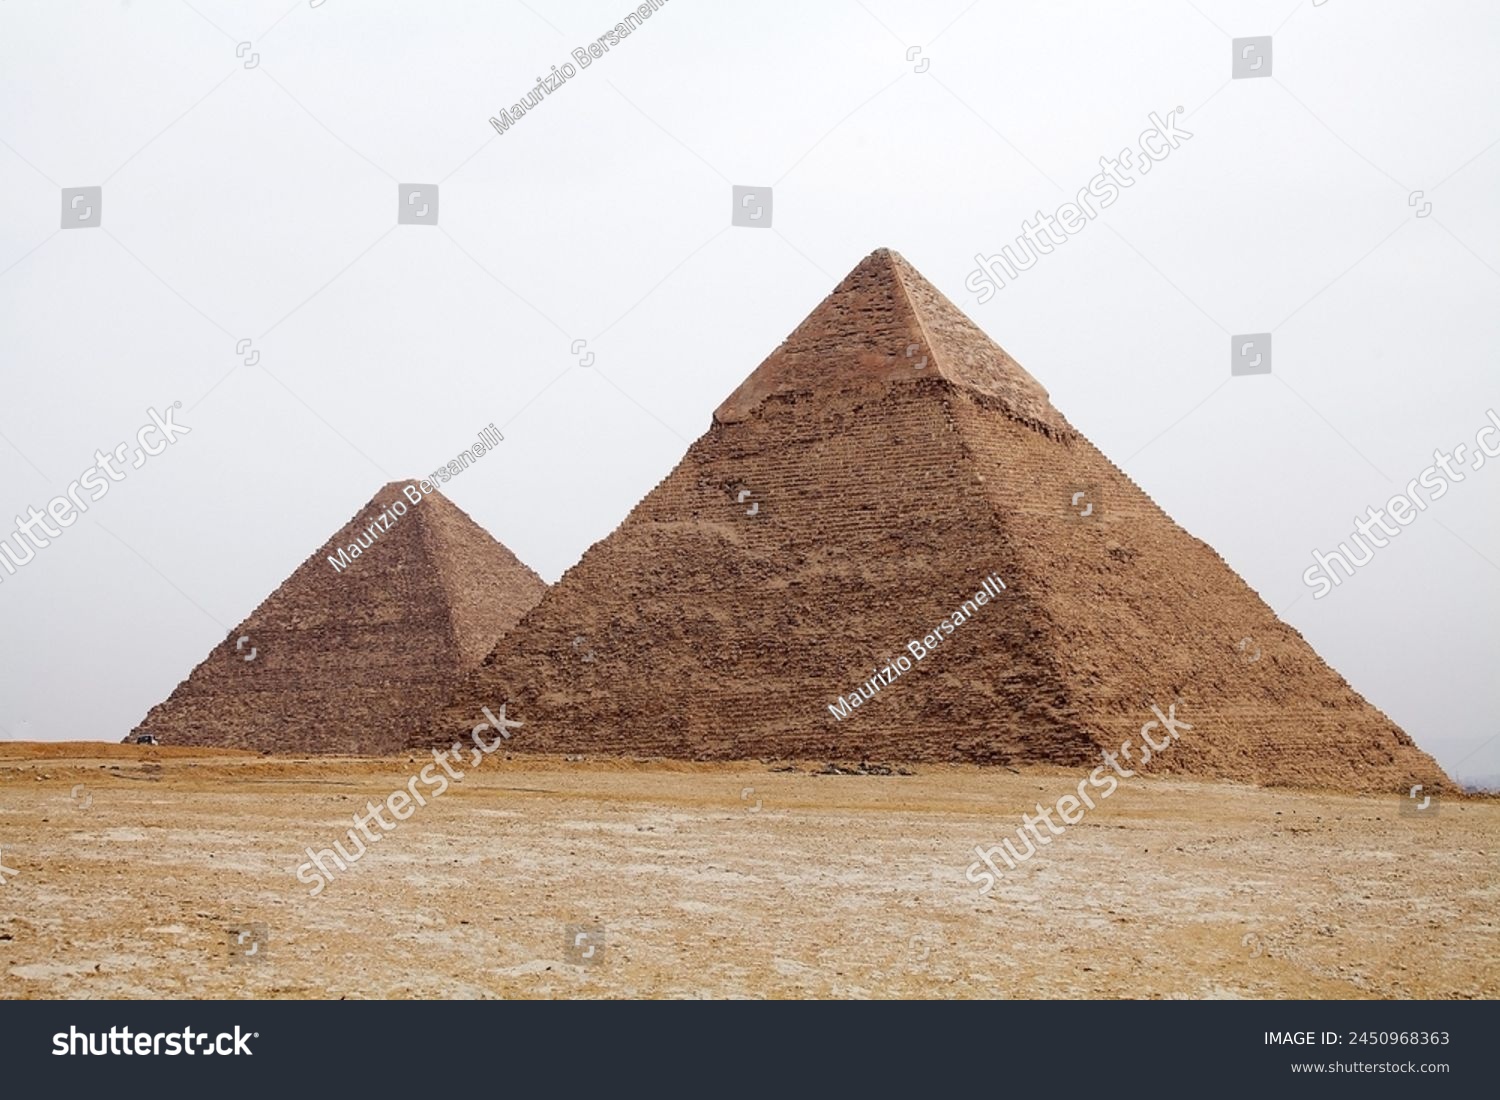 The Great Pyramid and Pyramid of Khefre at the Giza Pyramid Complex in Giza, Egypt, also called the Giza Necropolis. It was built during the Fourth Dynasty of the Old Kingdom #2450968363